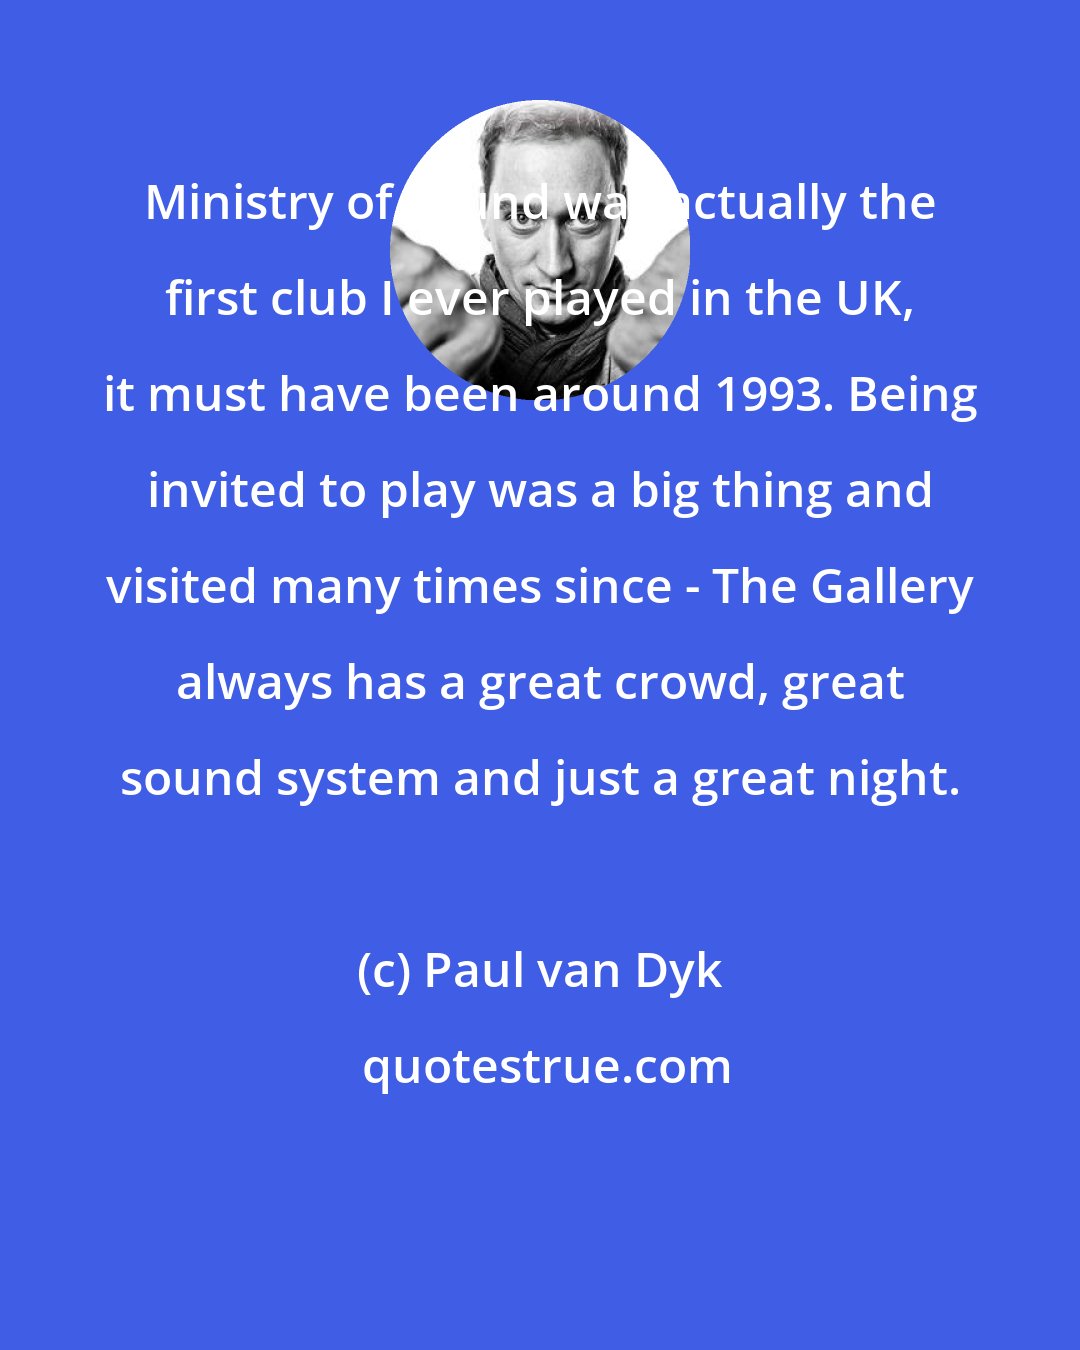 Paul van Dyk: Ministry of Sound was actually the first club I ever played in the UK, it must have been around 1993. Being invited to play was a big thing and visited many times since - The Gallery always has a great crowd, great sound system and just a great night.